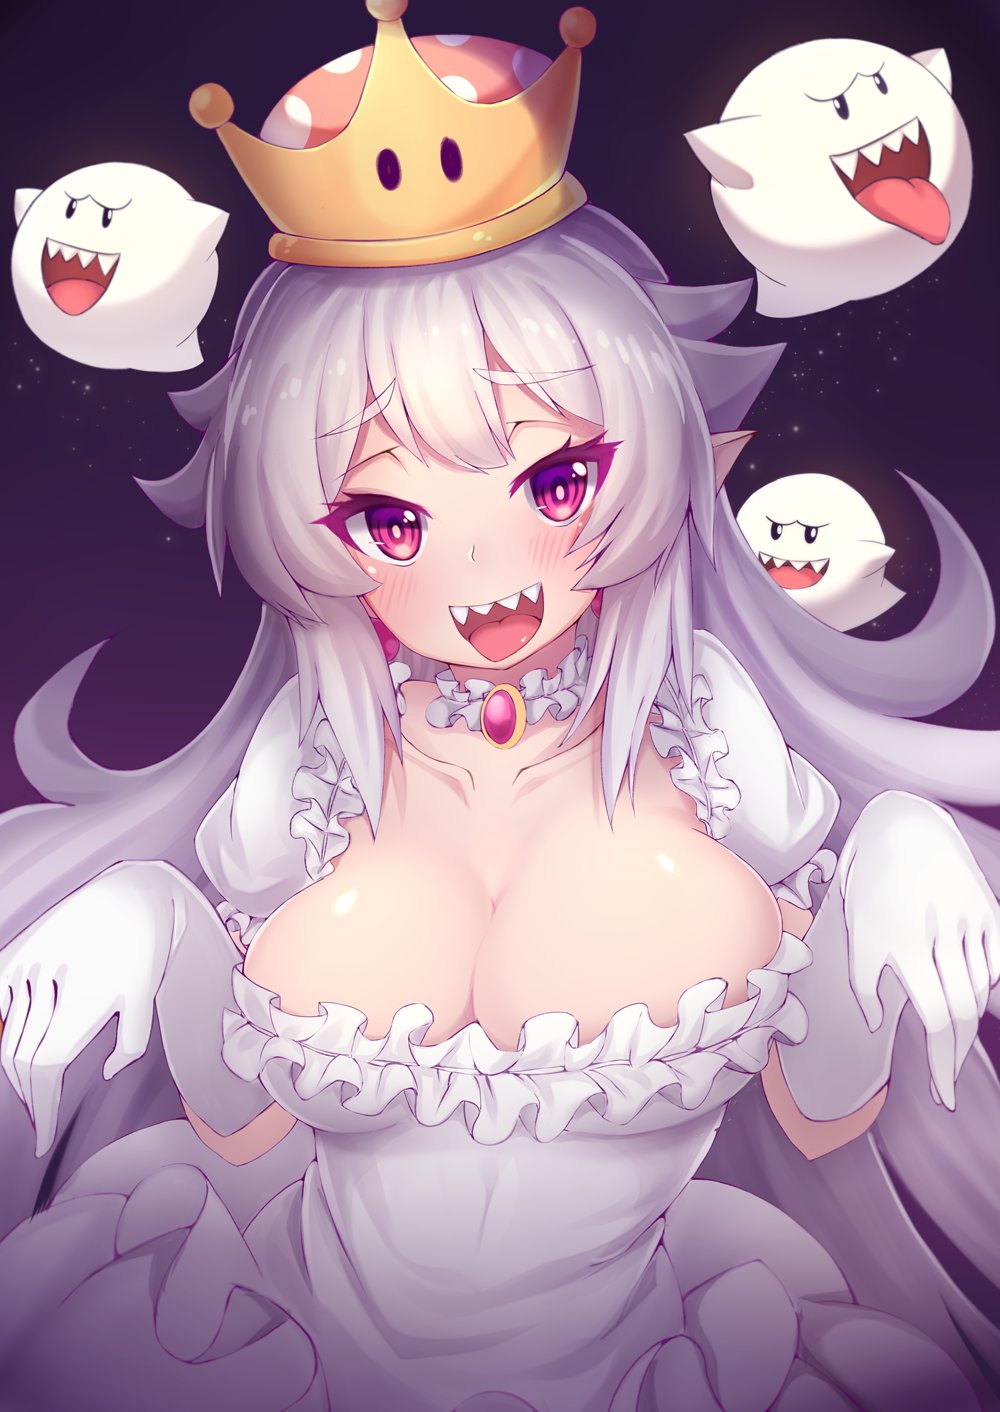 “@chan_ump Princess King Boo is here to haunt you! 